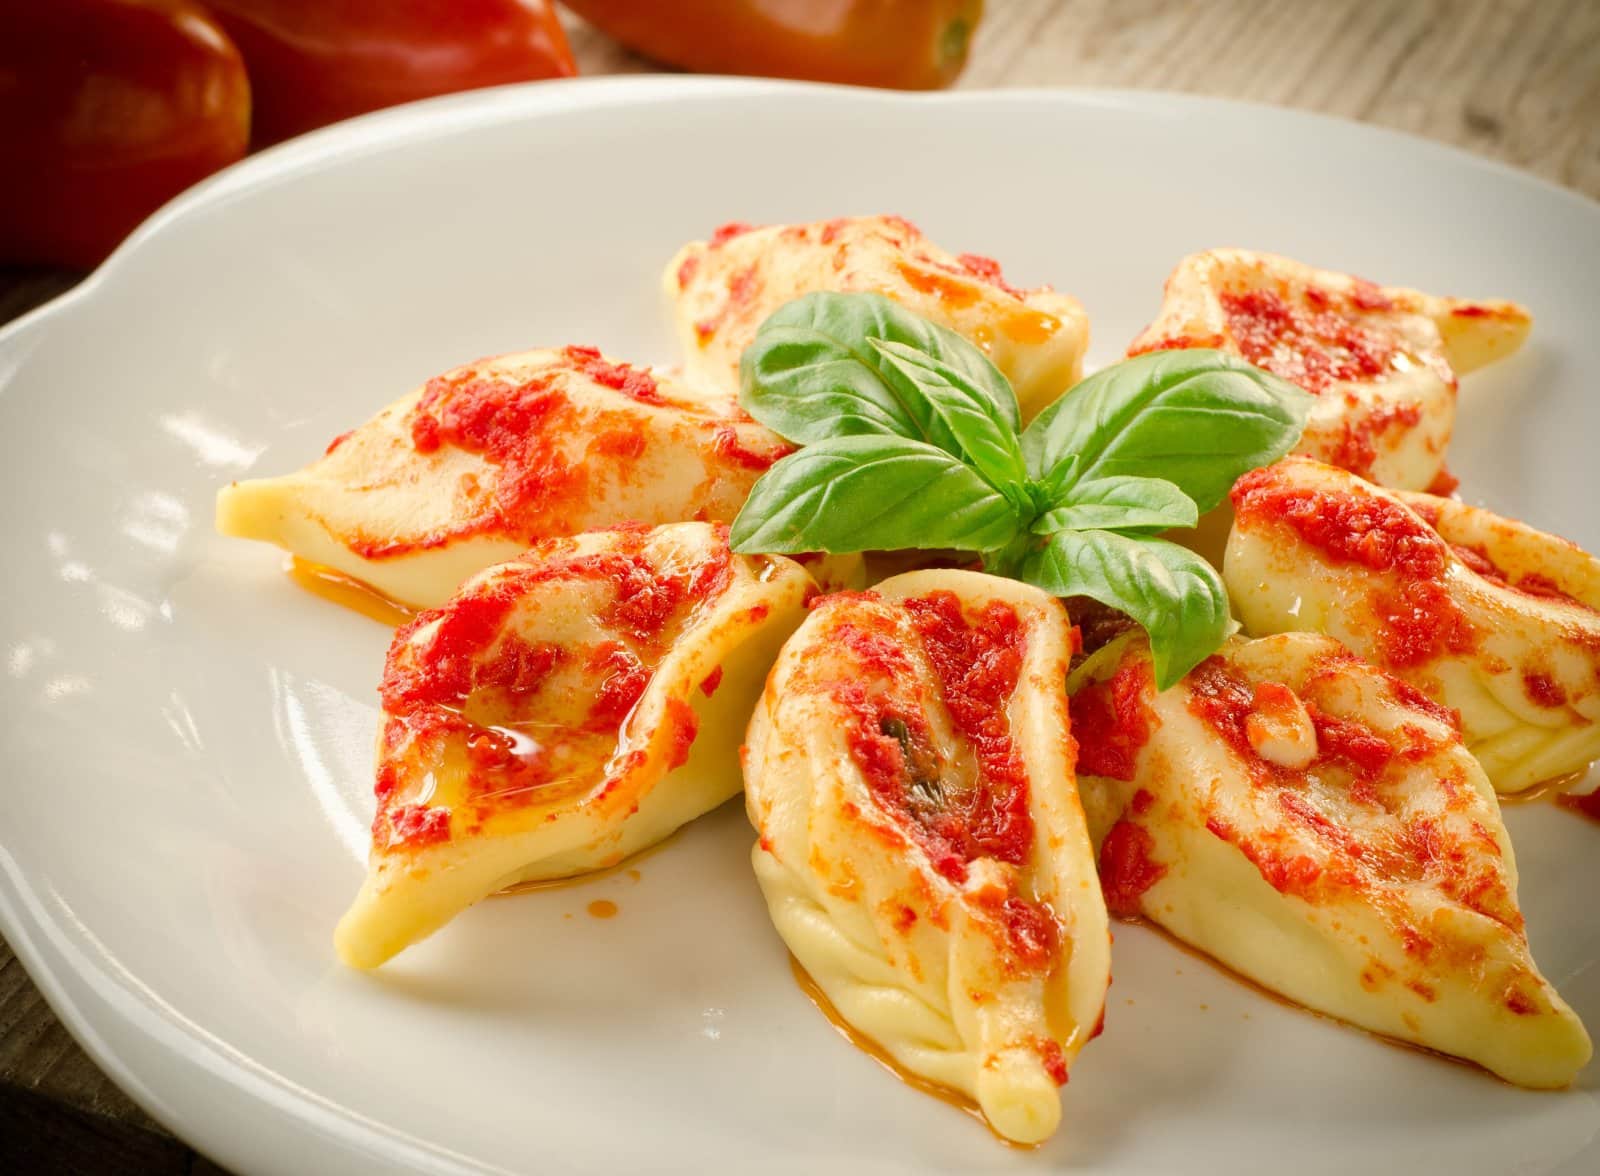 Image Credit: Shutterstock / Alessio Orru <p><span>Dive into the flavors of Ogliastra with culurgiones, a traditional Sardinian pasta filled with a tantalizing mixture of potato, pecorino cheese, and fresh mint. These handcrafted dumplings are shaped into intricate designs, symbolizing the region’s rich cultural heritage and culinary traditions. Savor them with a drizzle of fragrant olive oil or a sprinkle of zesty lemon zest for a lunchtime delight that’s both comforting and complex.</span></p>